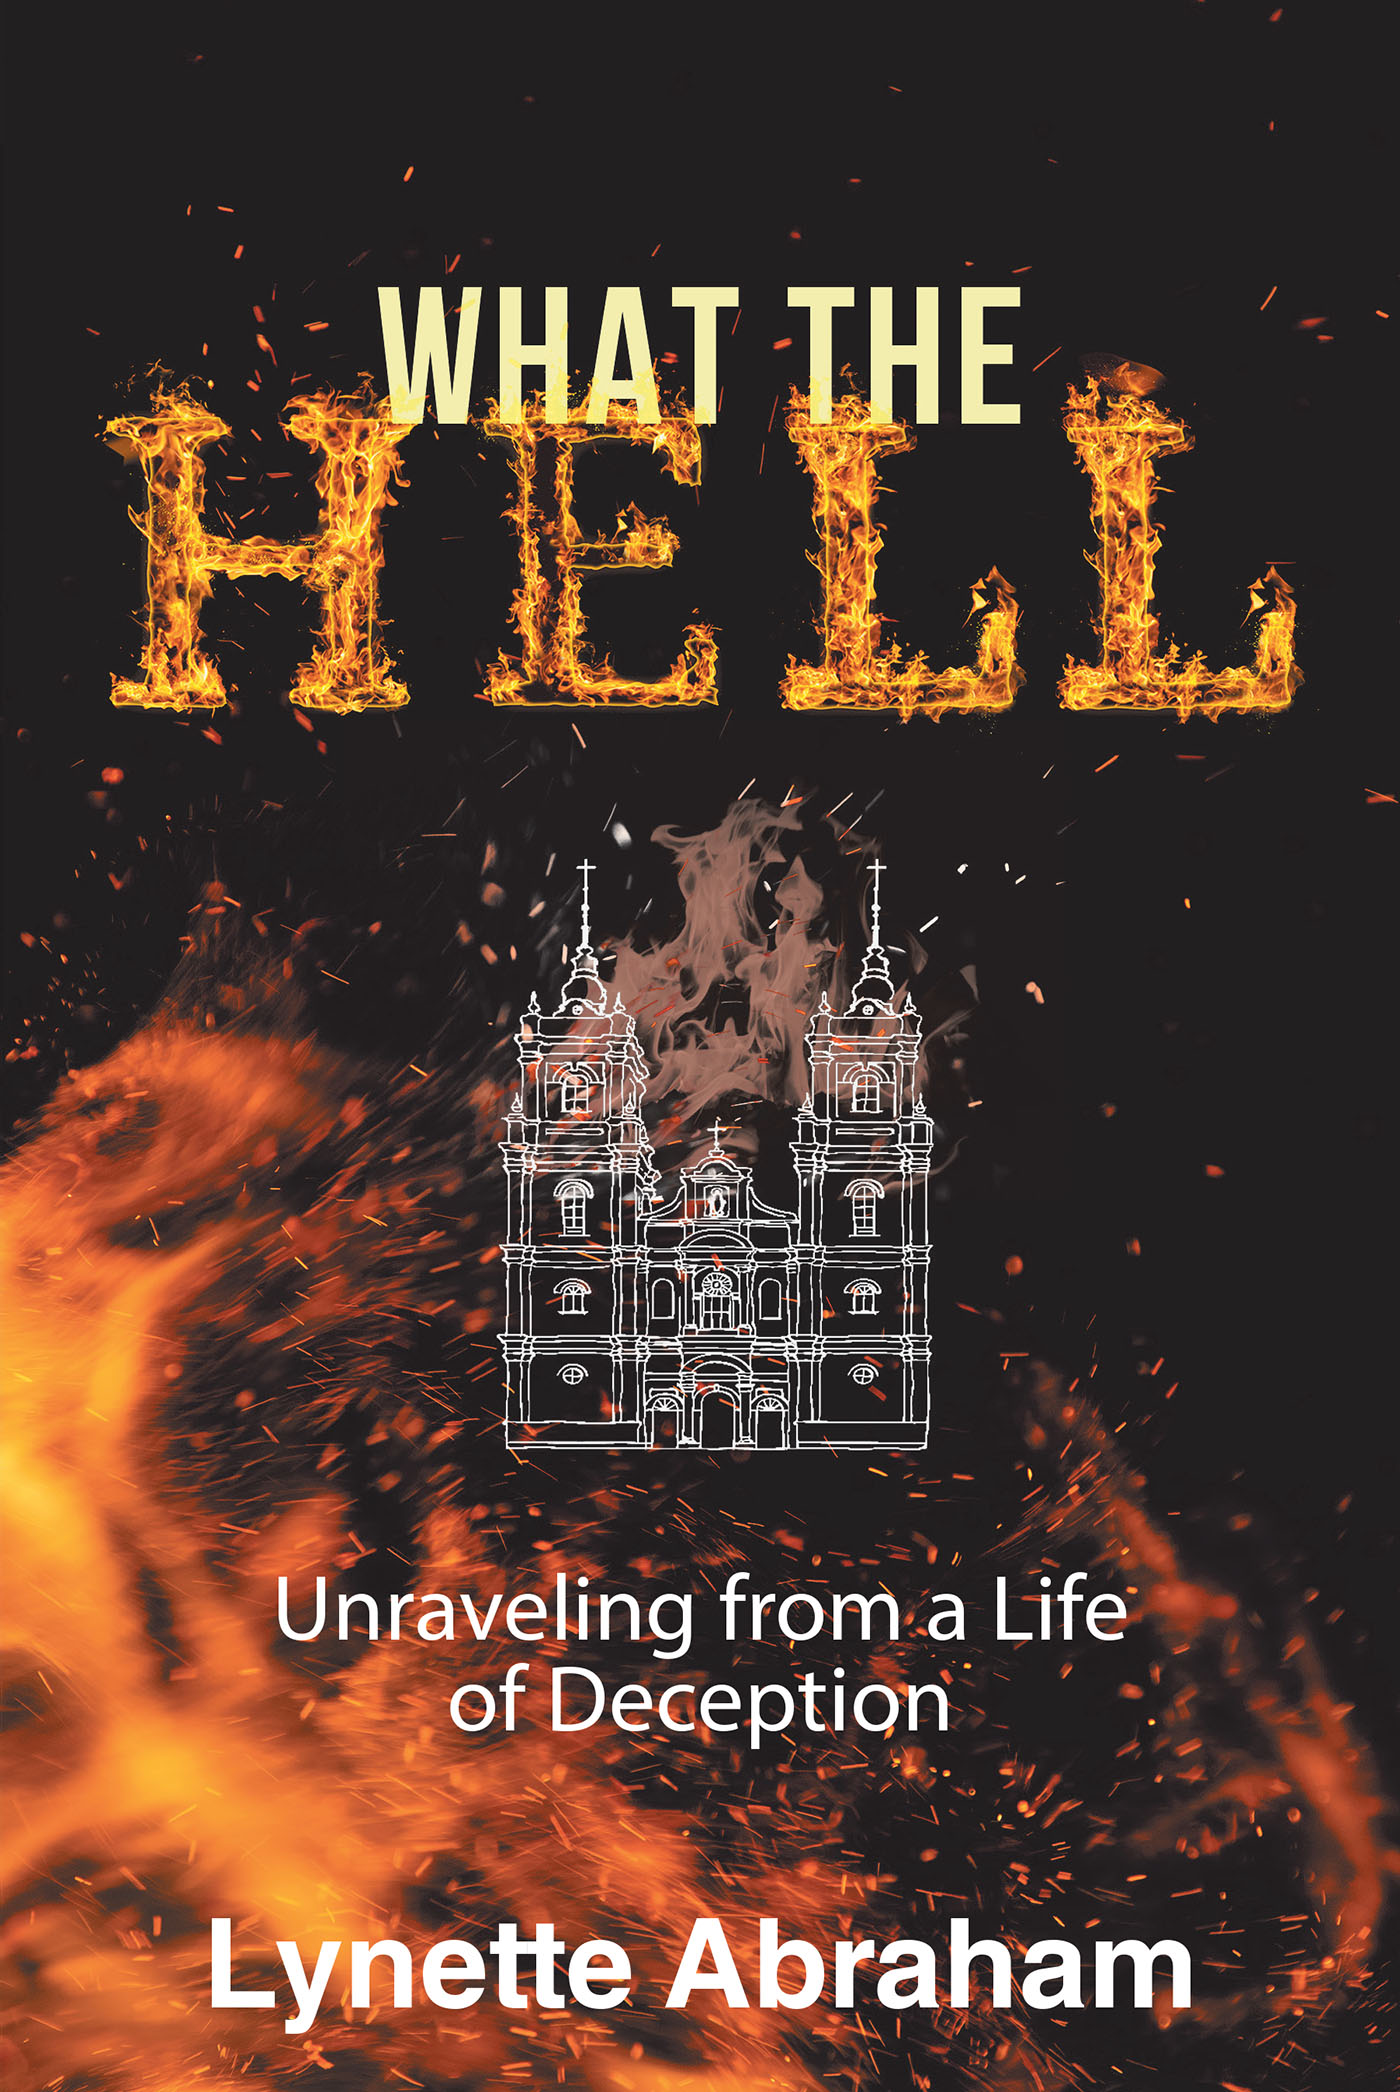 Lynette Abraham’s Newly Released "What The Hell: Unraveling from a Life of Deception" is a Candid and Impactful Account of Overcoming Personal Struggles